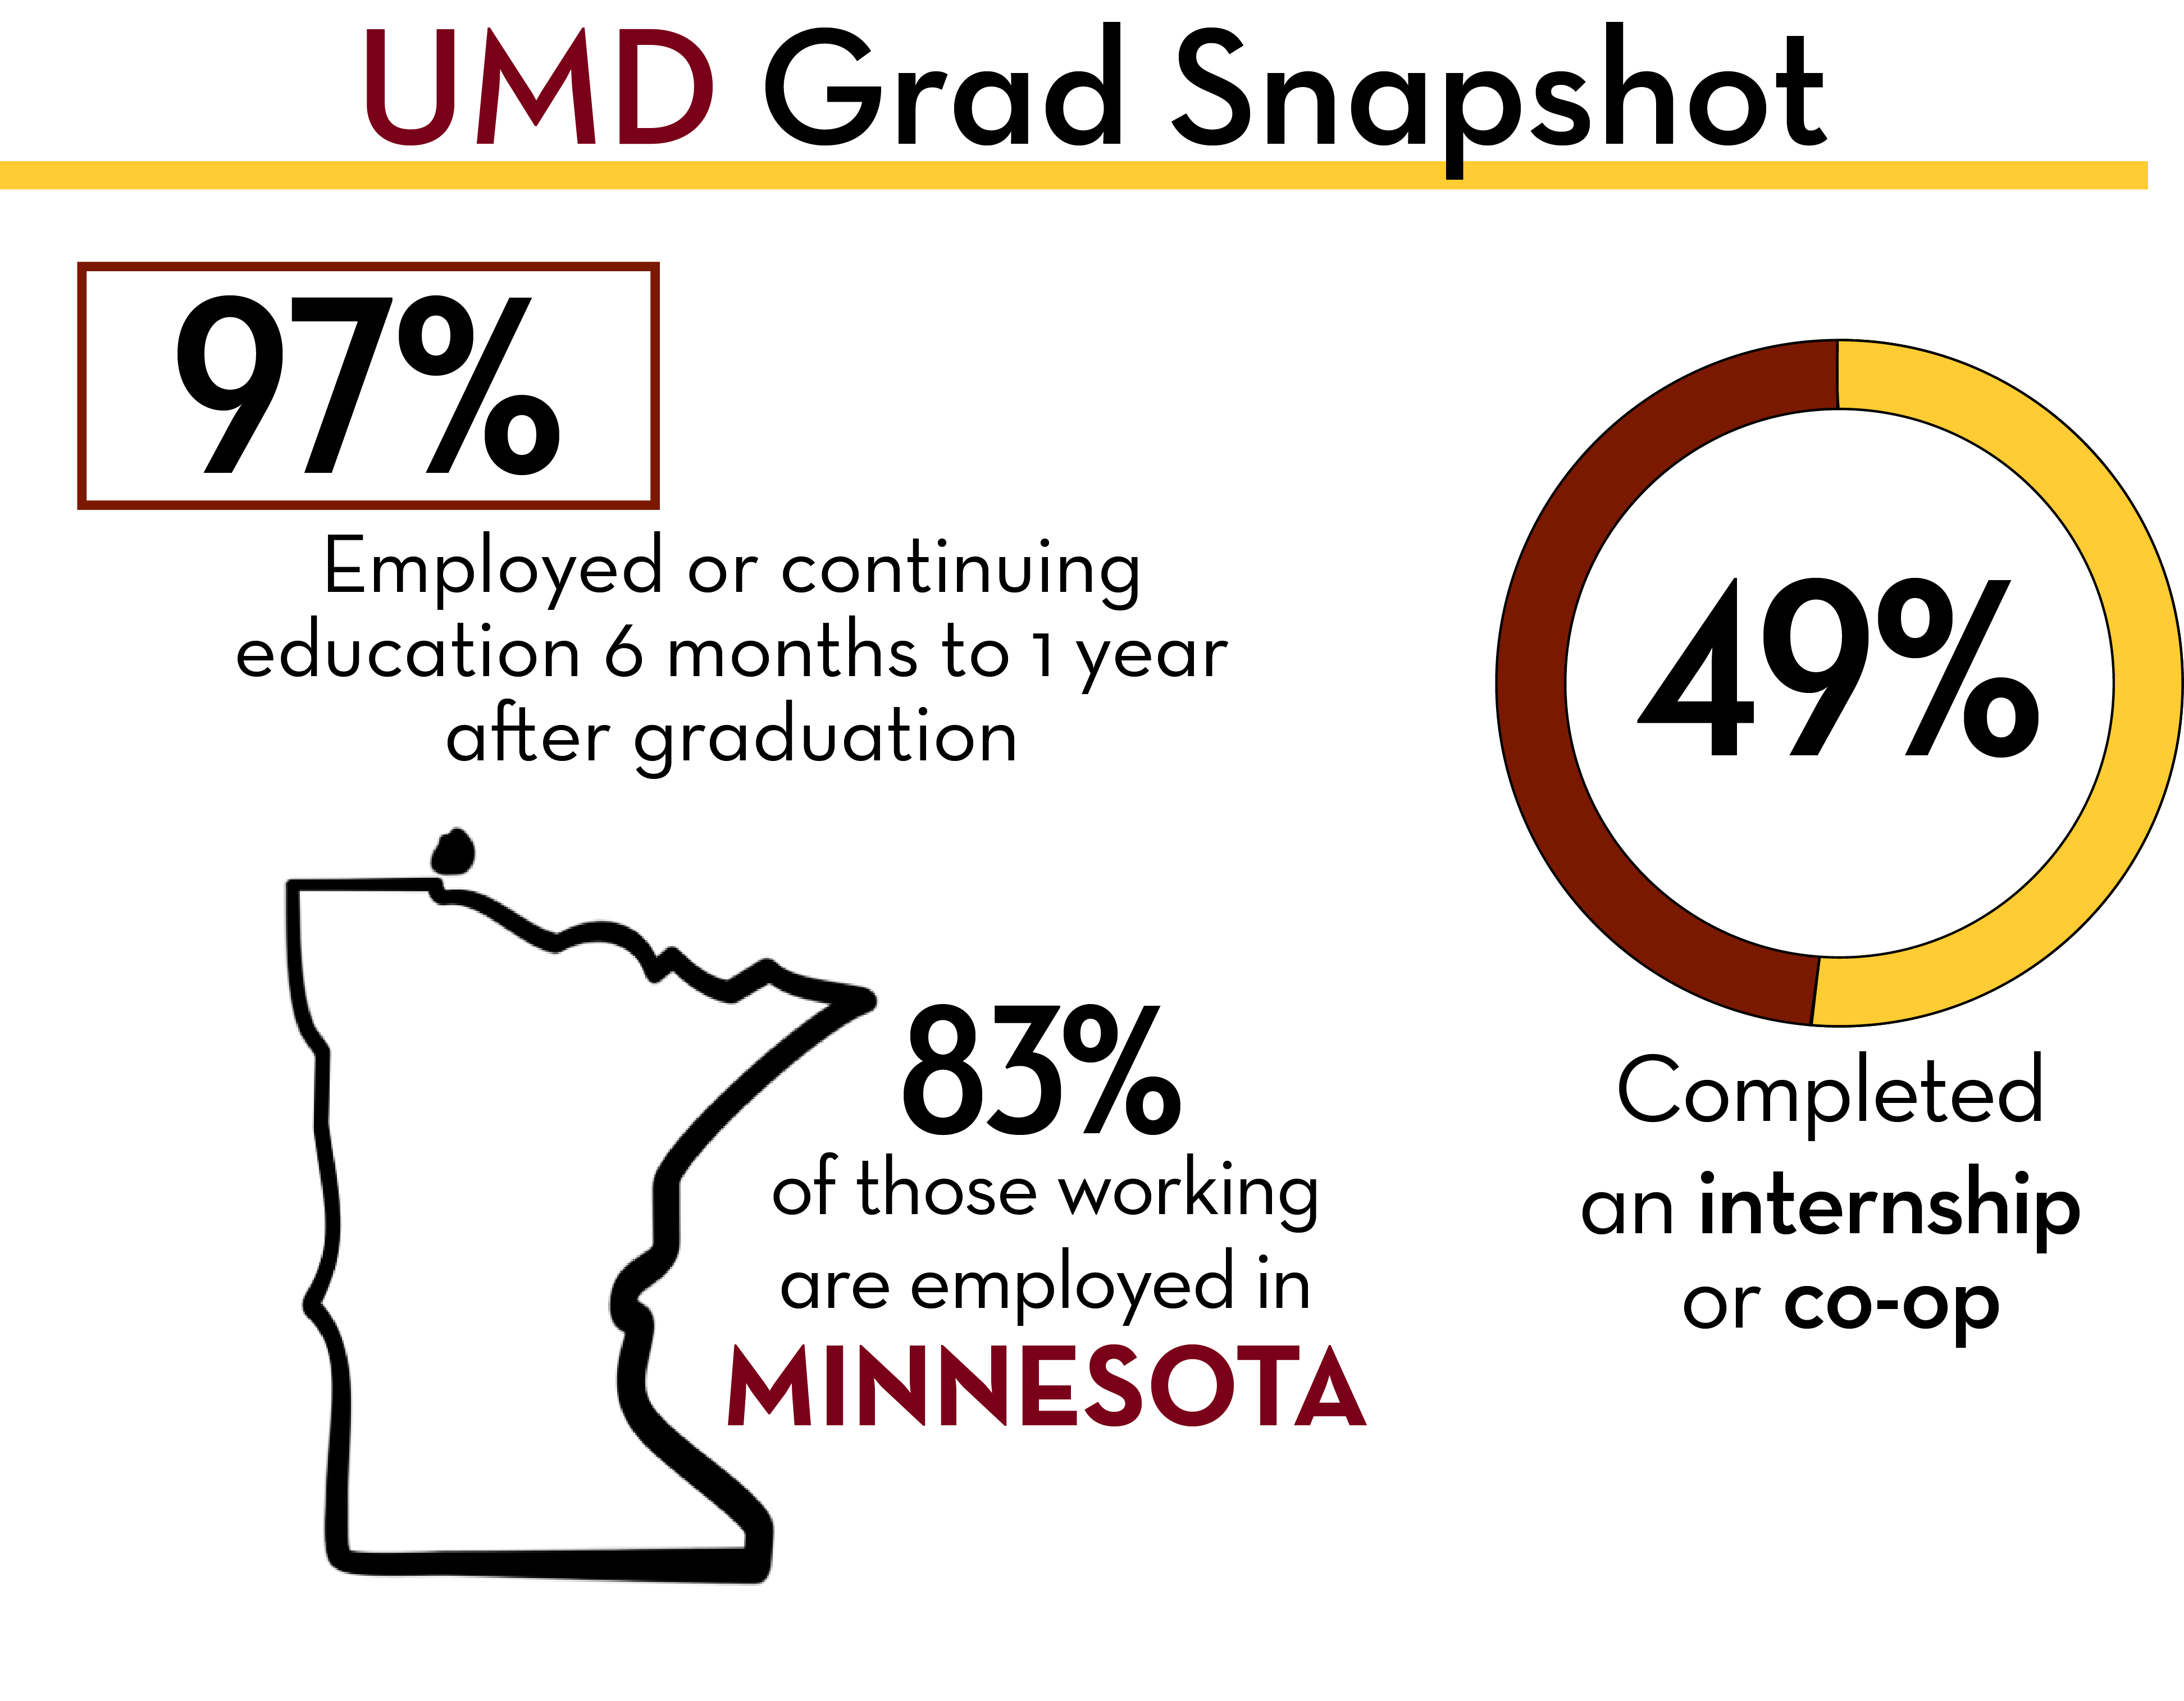 Percentage of students that are employed or continuing education, working in Minnesota, and completed an internship 